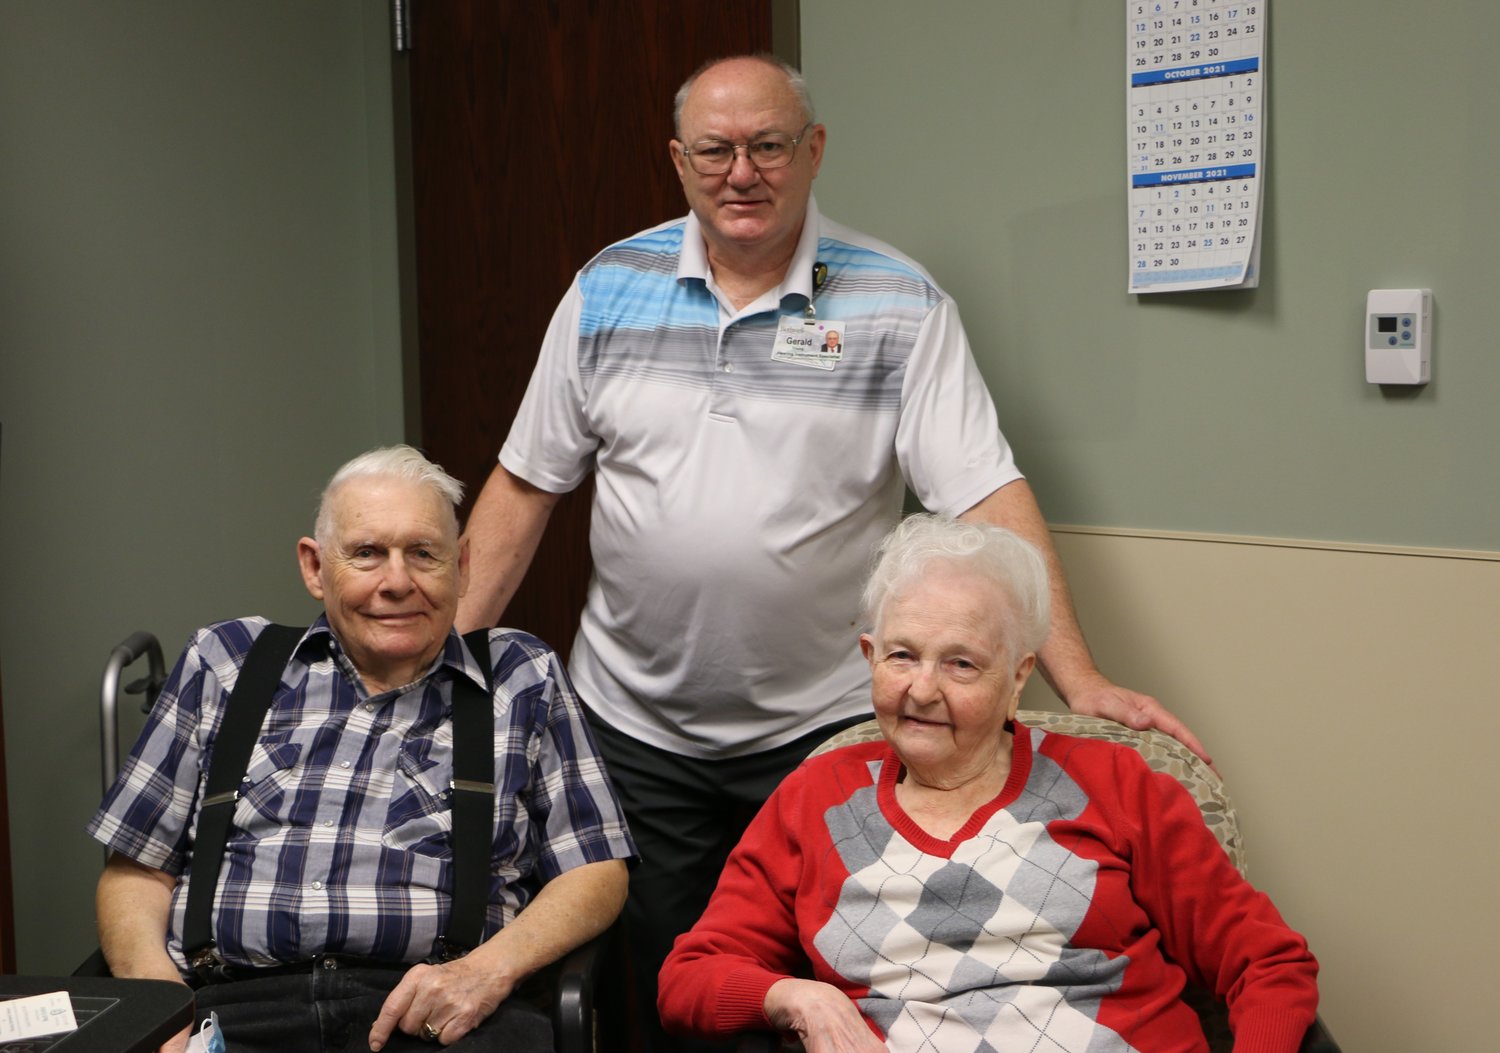 Front row, from left, Clyde and Beatrice Jobson. Back row, Gerald Young, Bothwell ENT board-certified hearing instrument specialist.